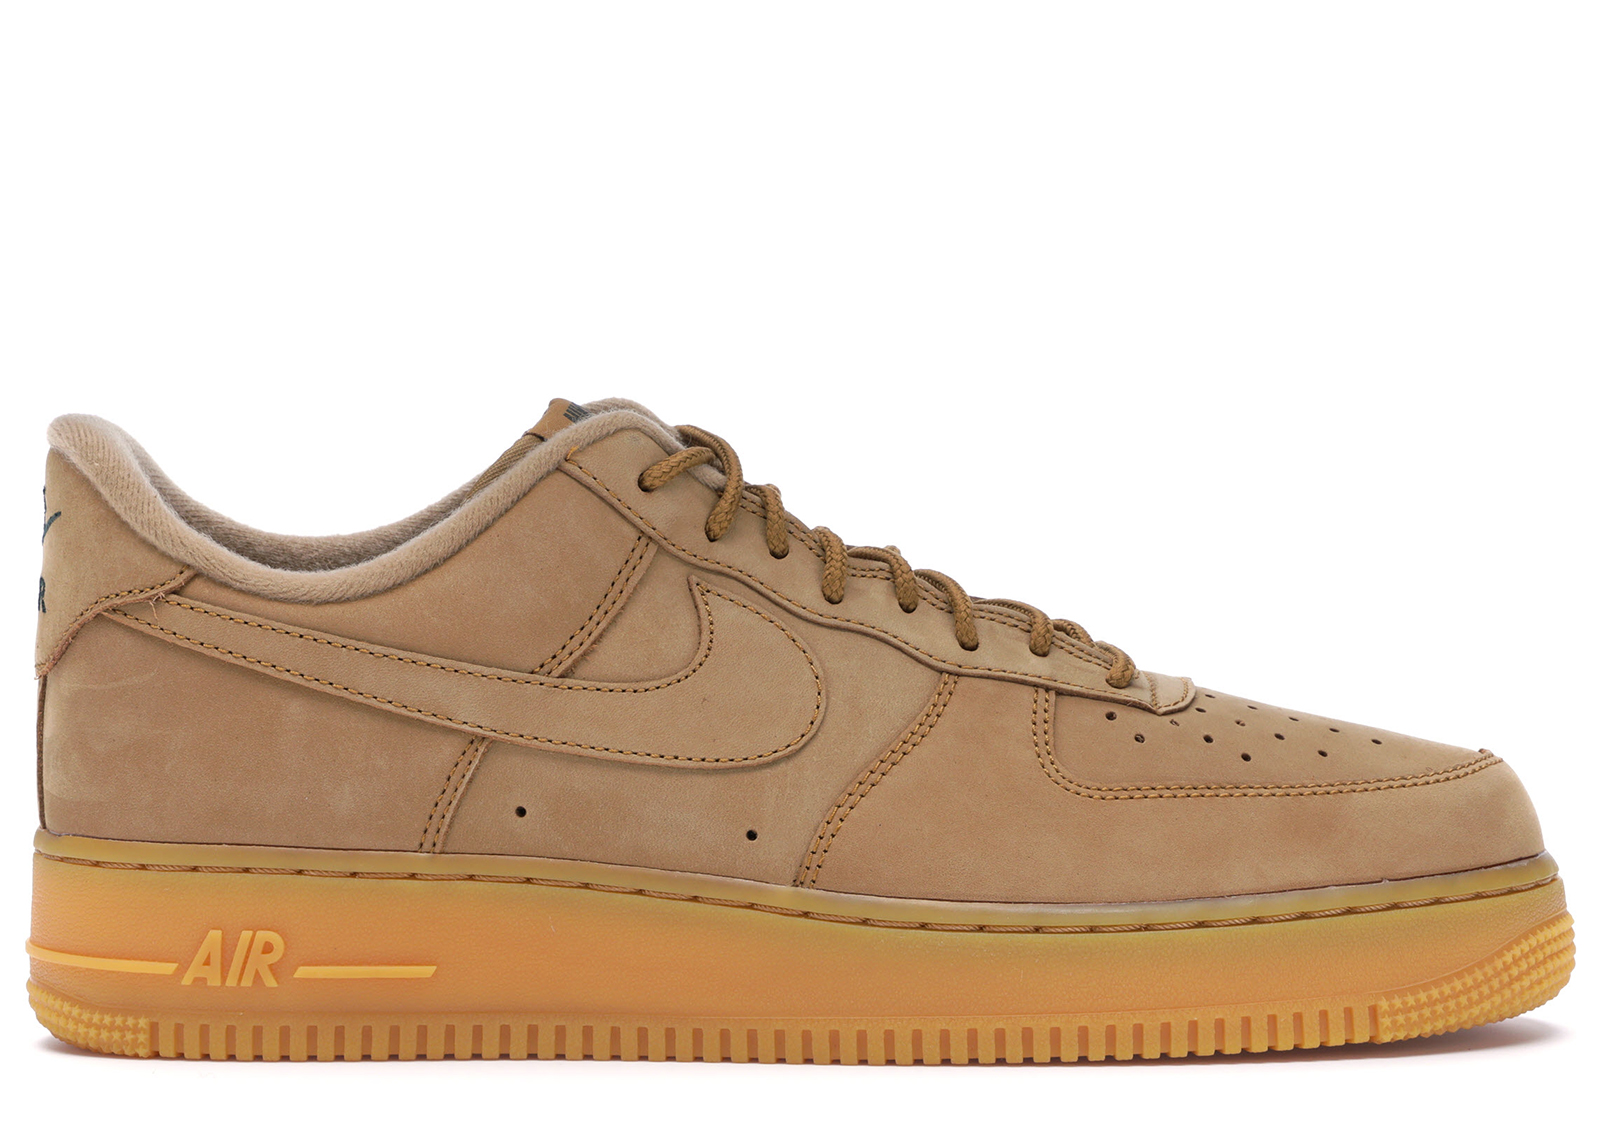 Nike Air Force 1 Low Flax (2018 